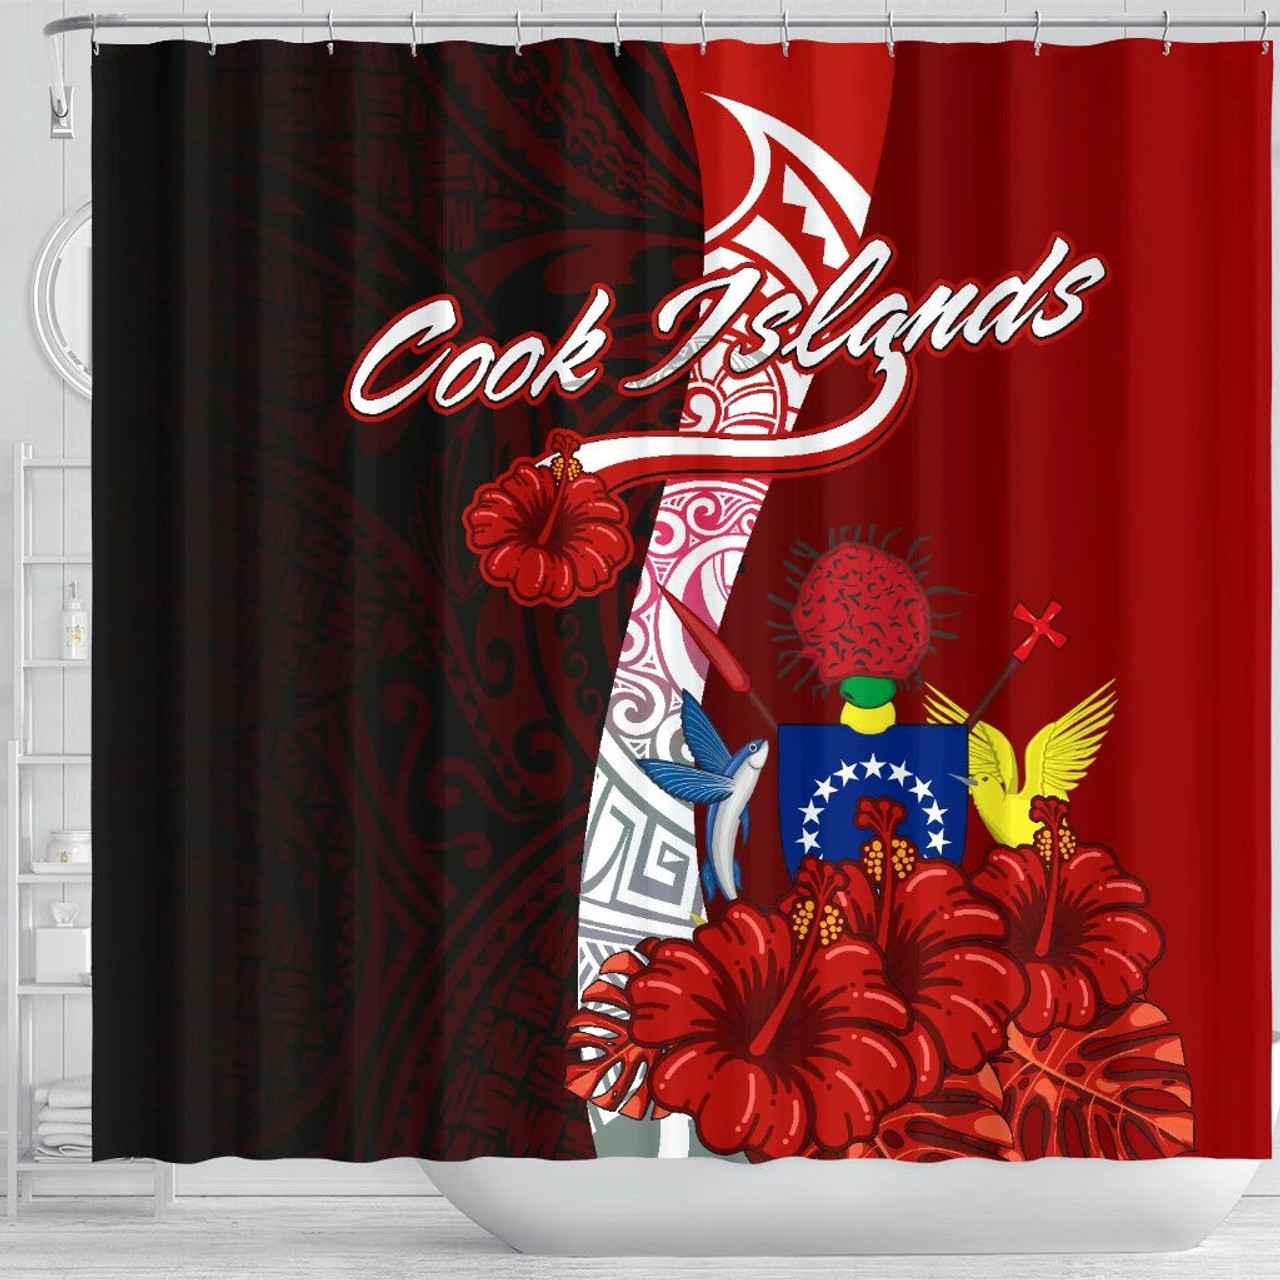 Cook Islands Polynesian Shower Curtain - Coat Of Arm With Hibiscus 3